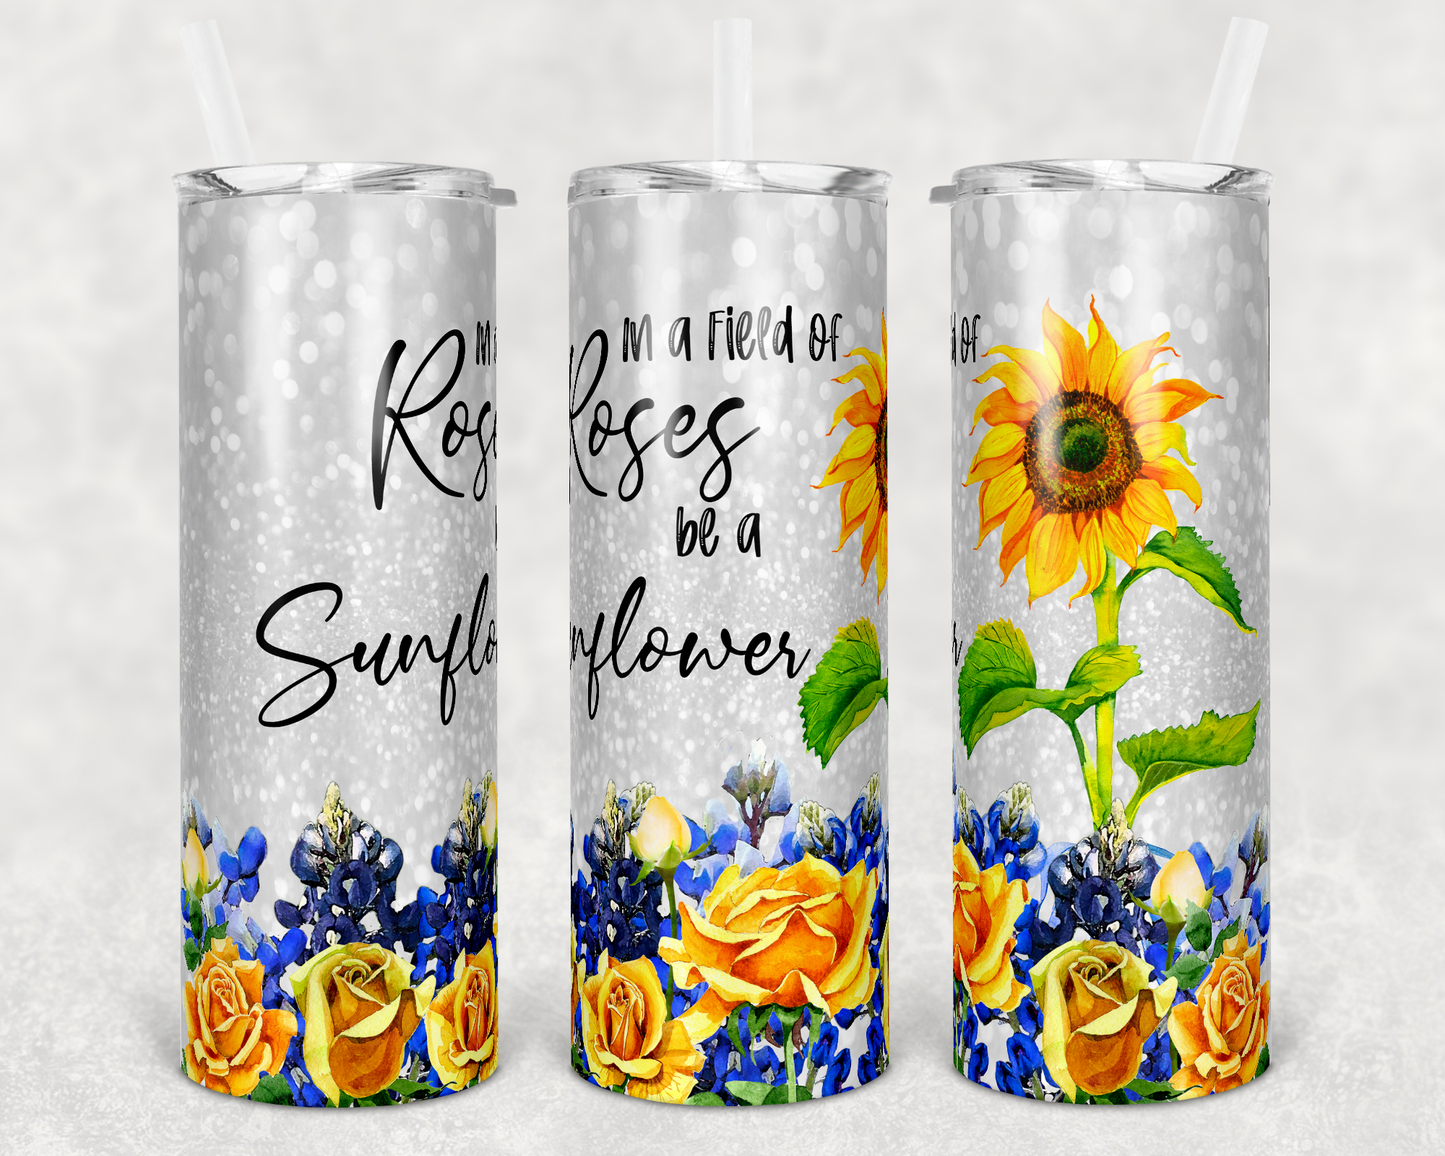 The "Sunflower" 20 oz Double Wall Stainless Steel Tumbler